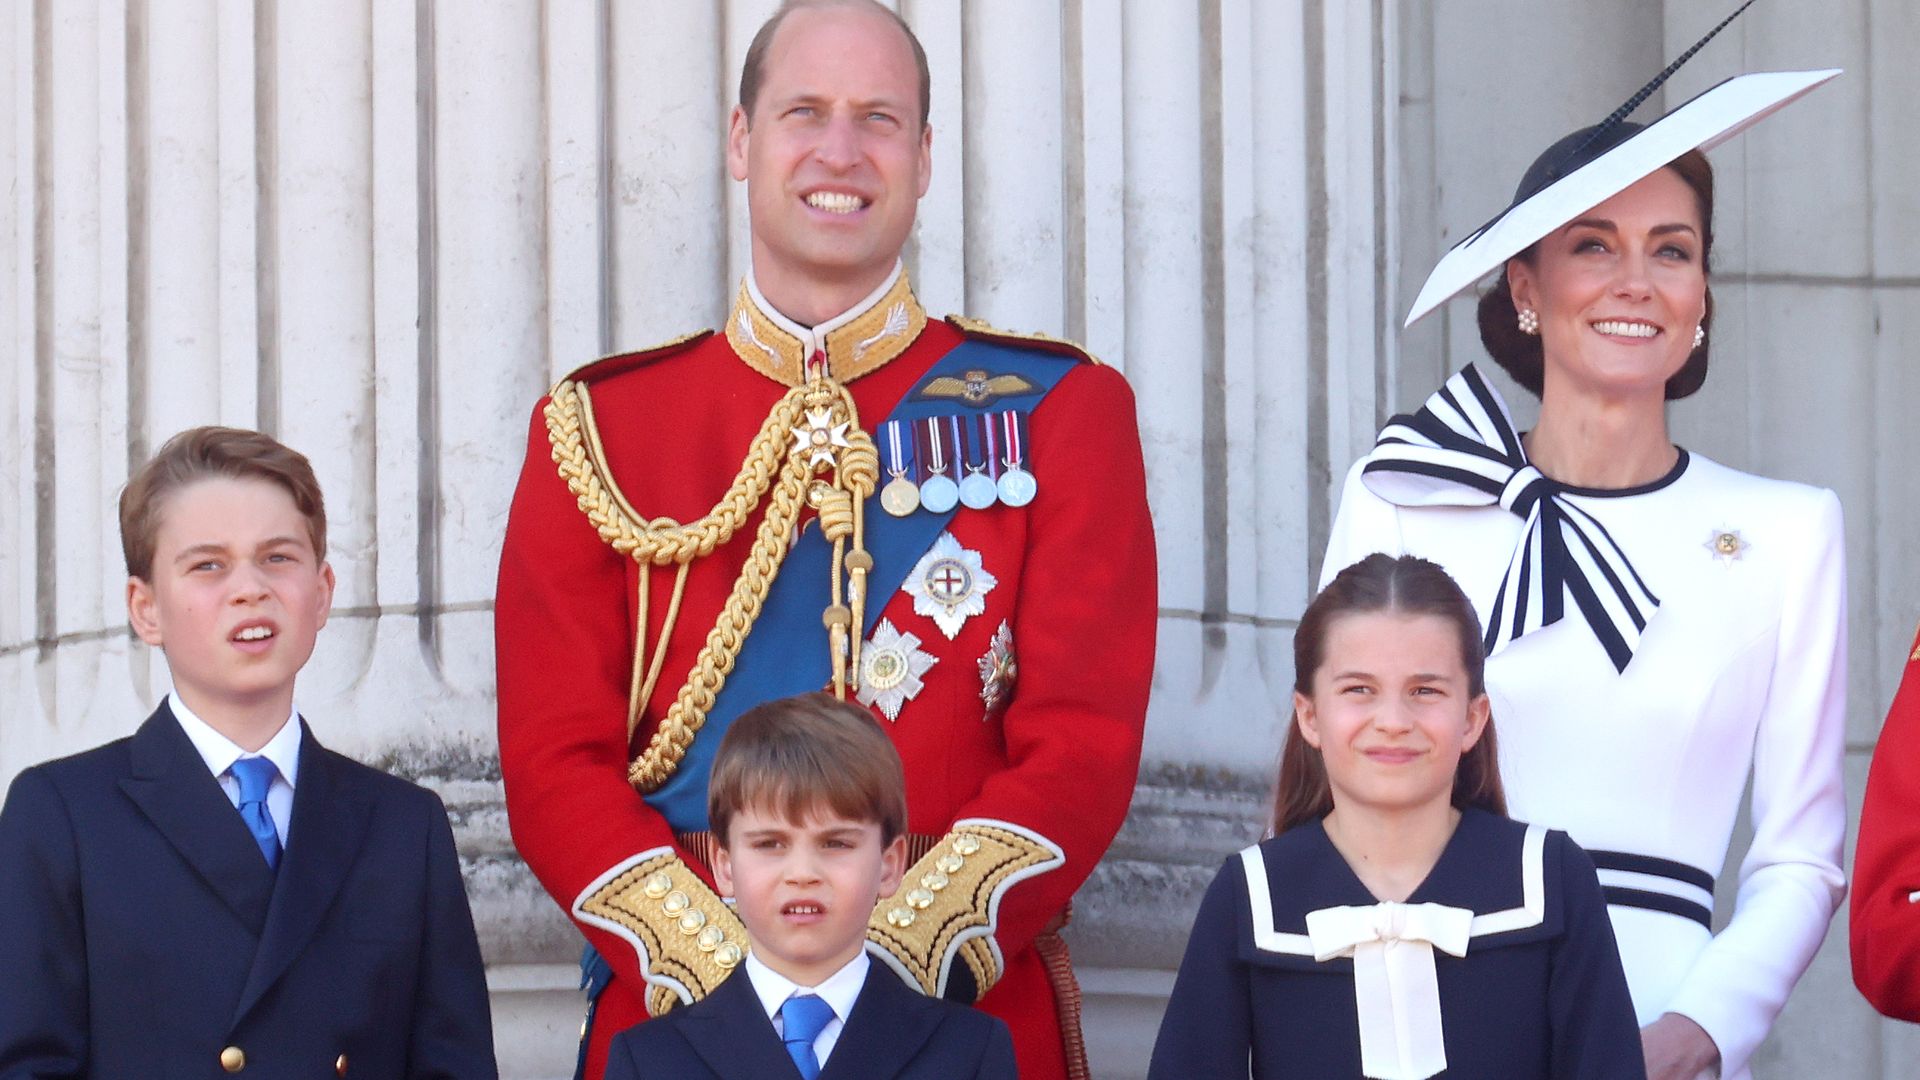 Prince William jumps with George, Charlotte and Louis in fun new photo: 'We all love you so much'